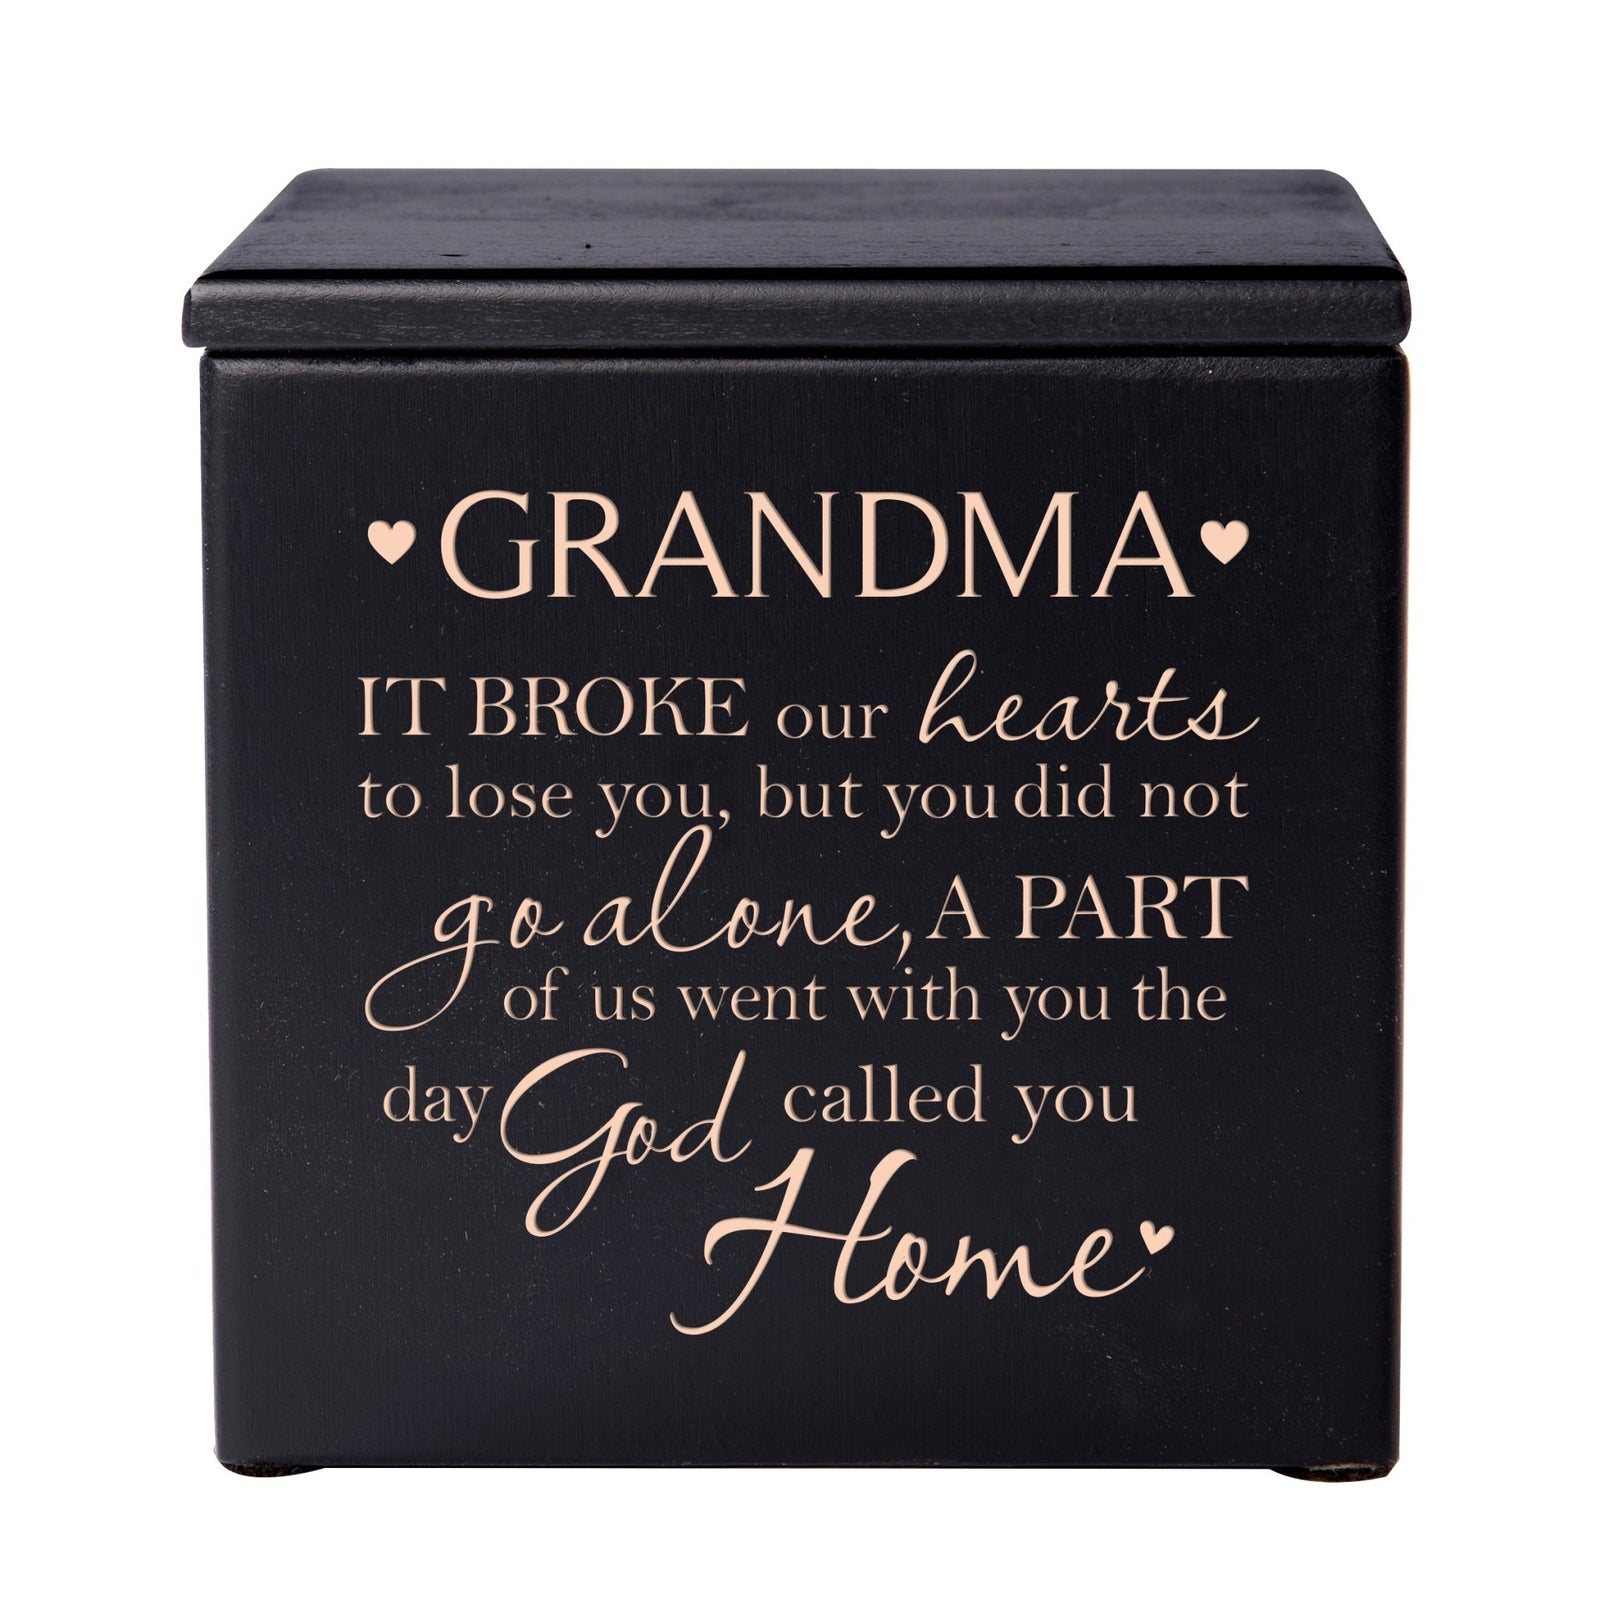 Modern Inspirational Memorial Wooden Cremation Urn Box 4.5x4.5in Holds 49 Cu Inches Of Human Ashes (It Broke Our Hearts Grandma) Funeral and Commemorative Keepsake - LifeSong Milestones